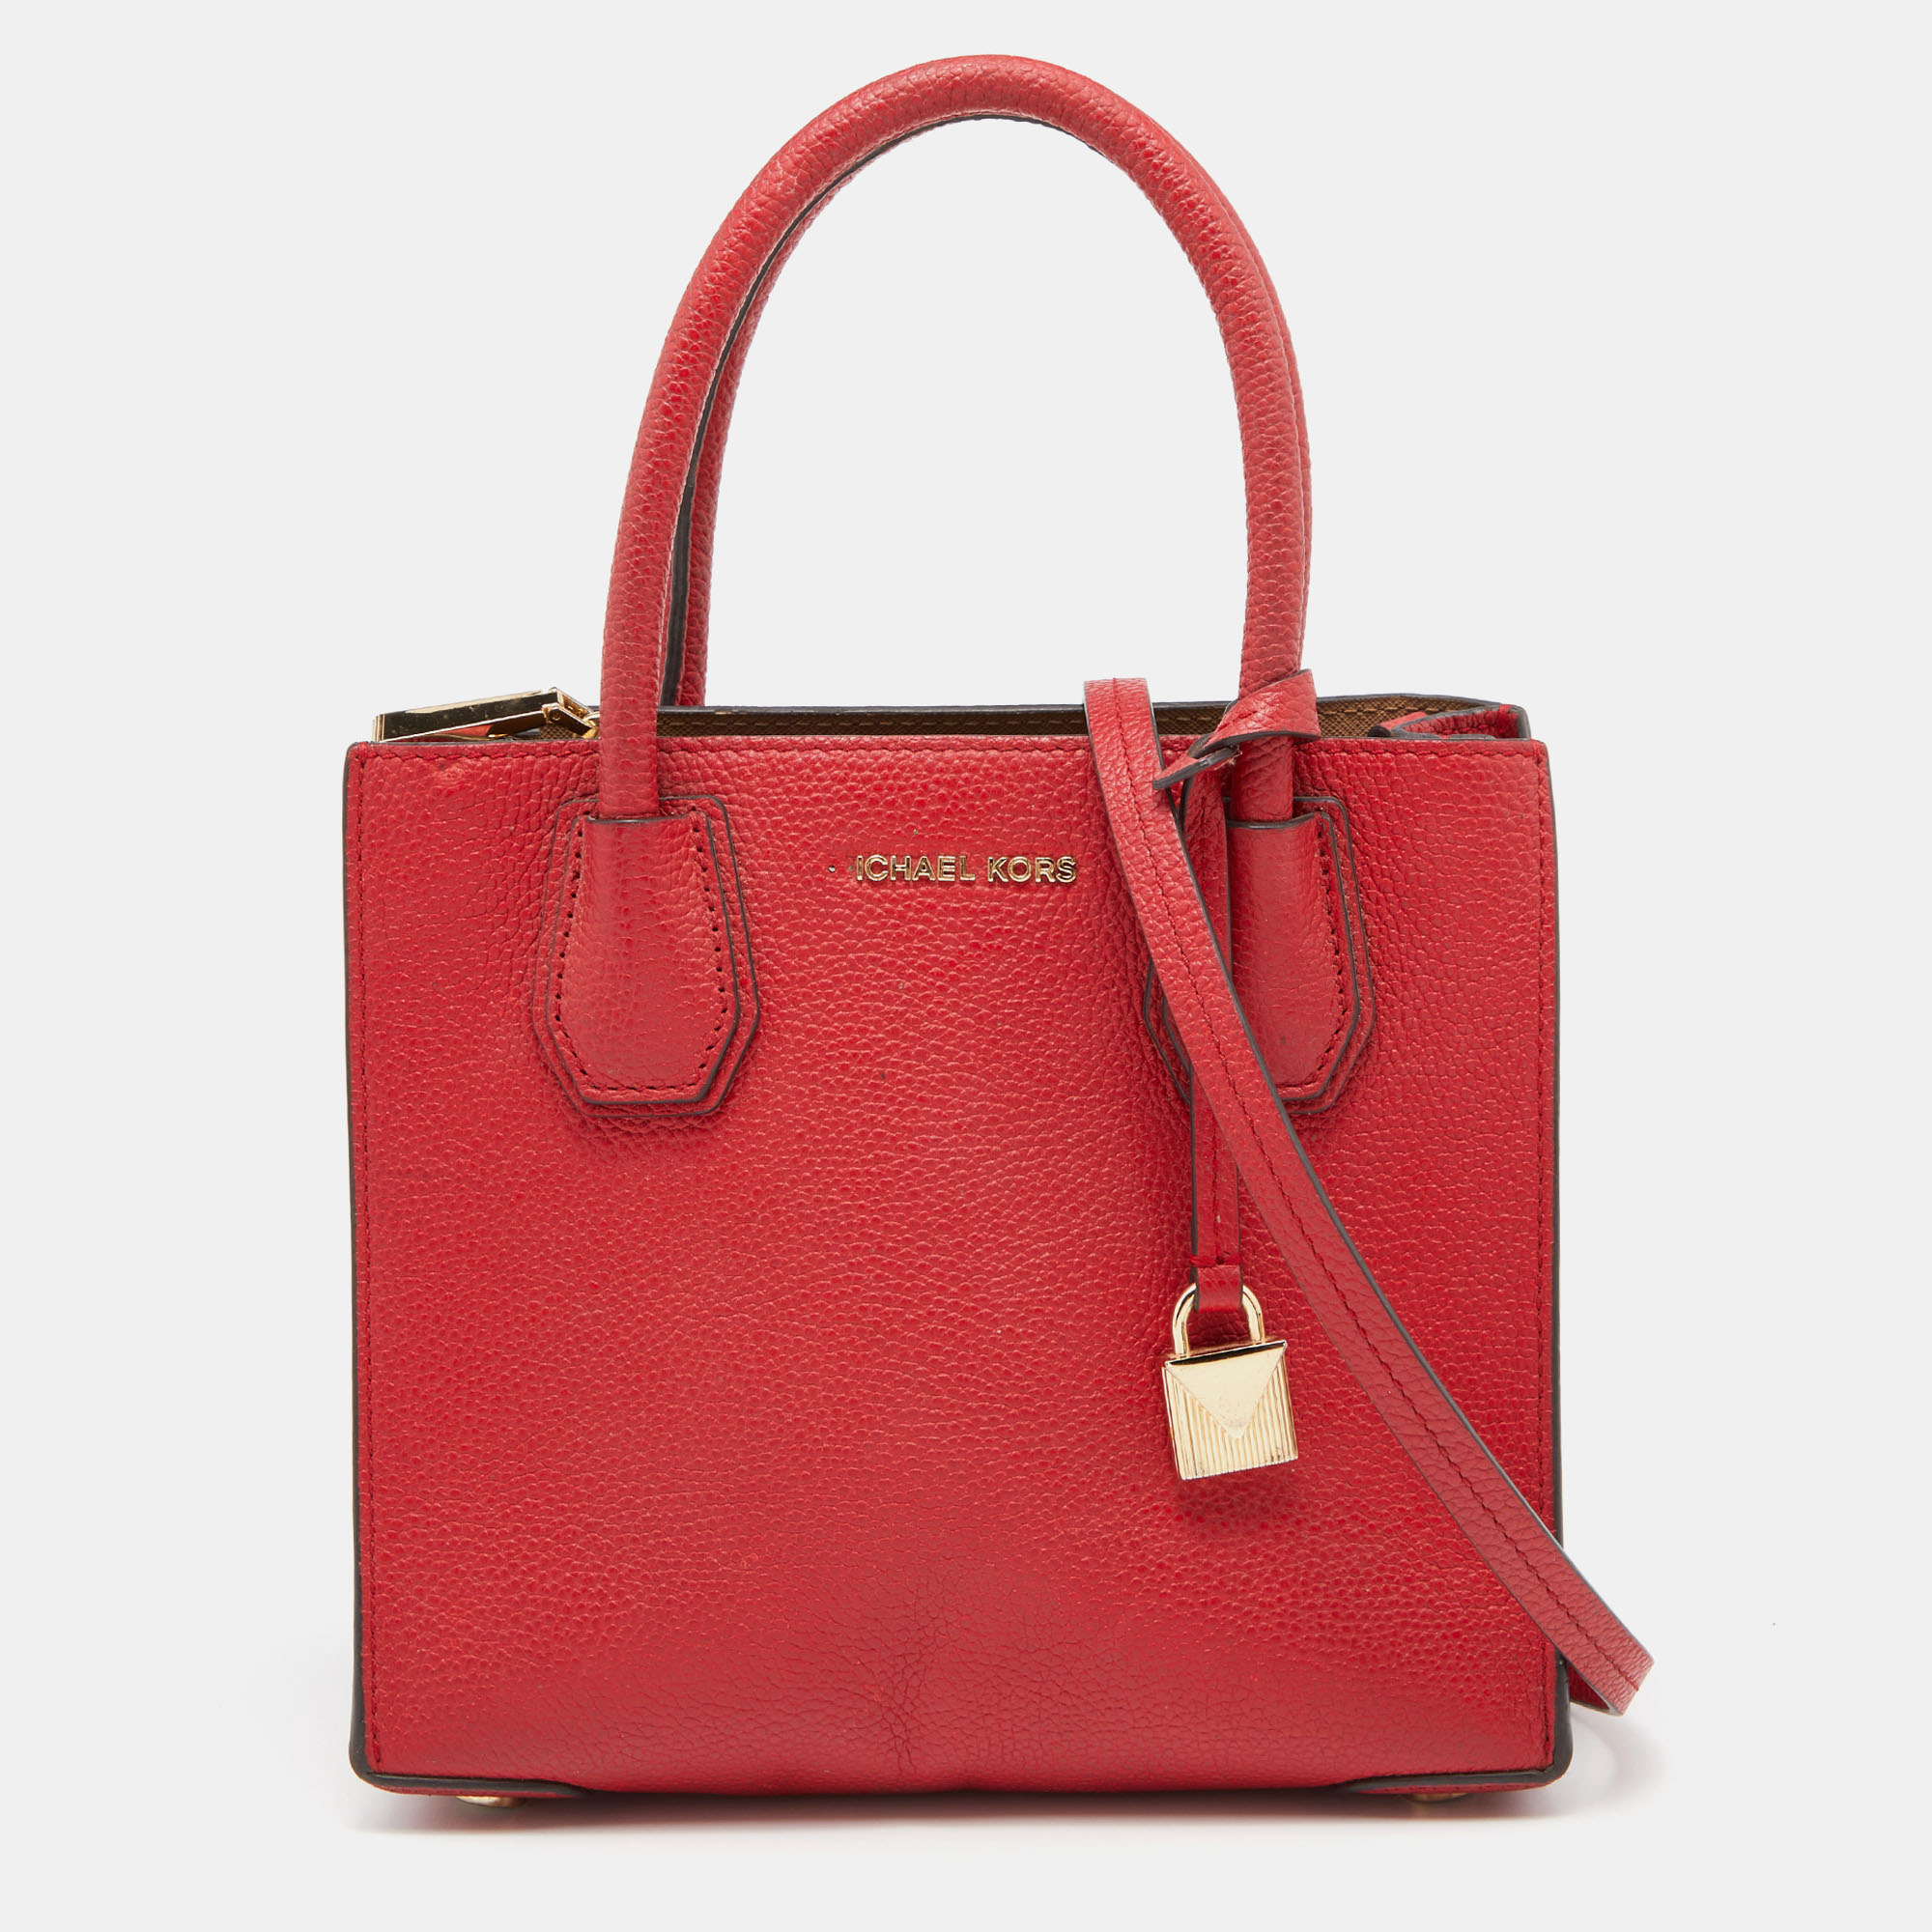 Pre-owned Michael Kors Red Leather Mini Mercer Tote